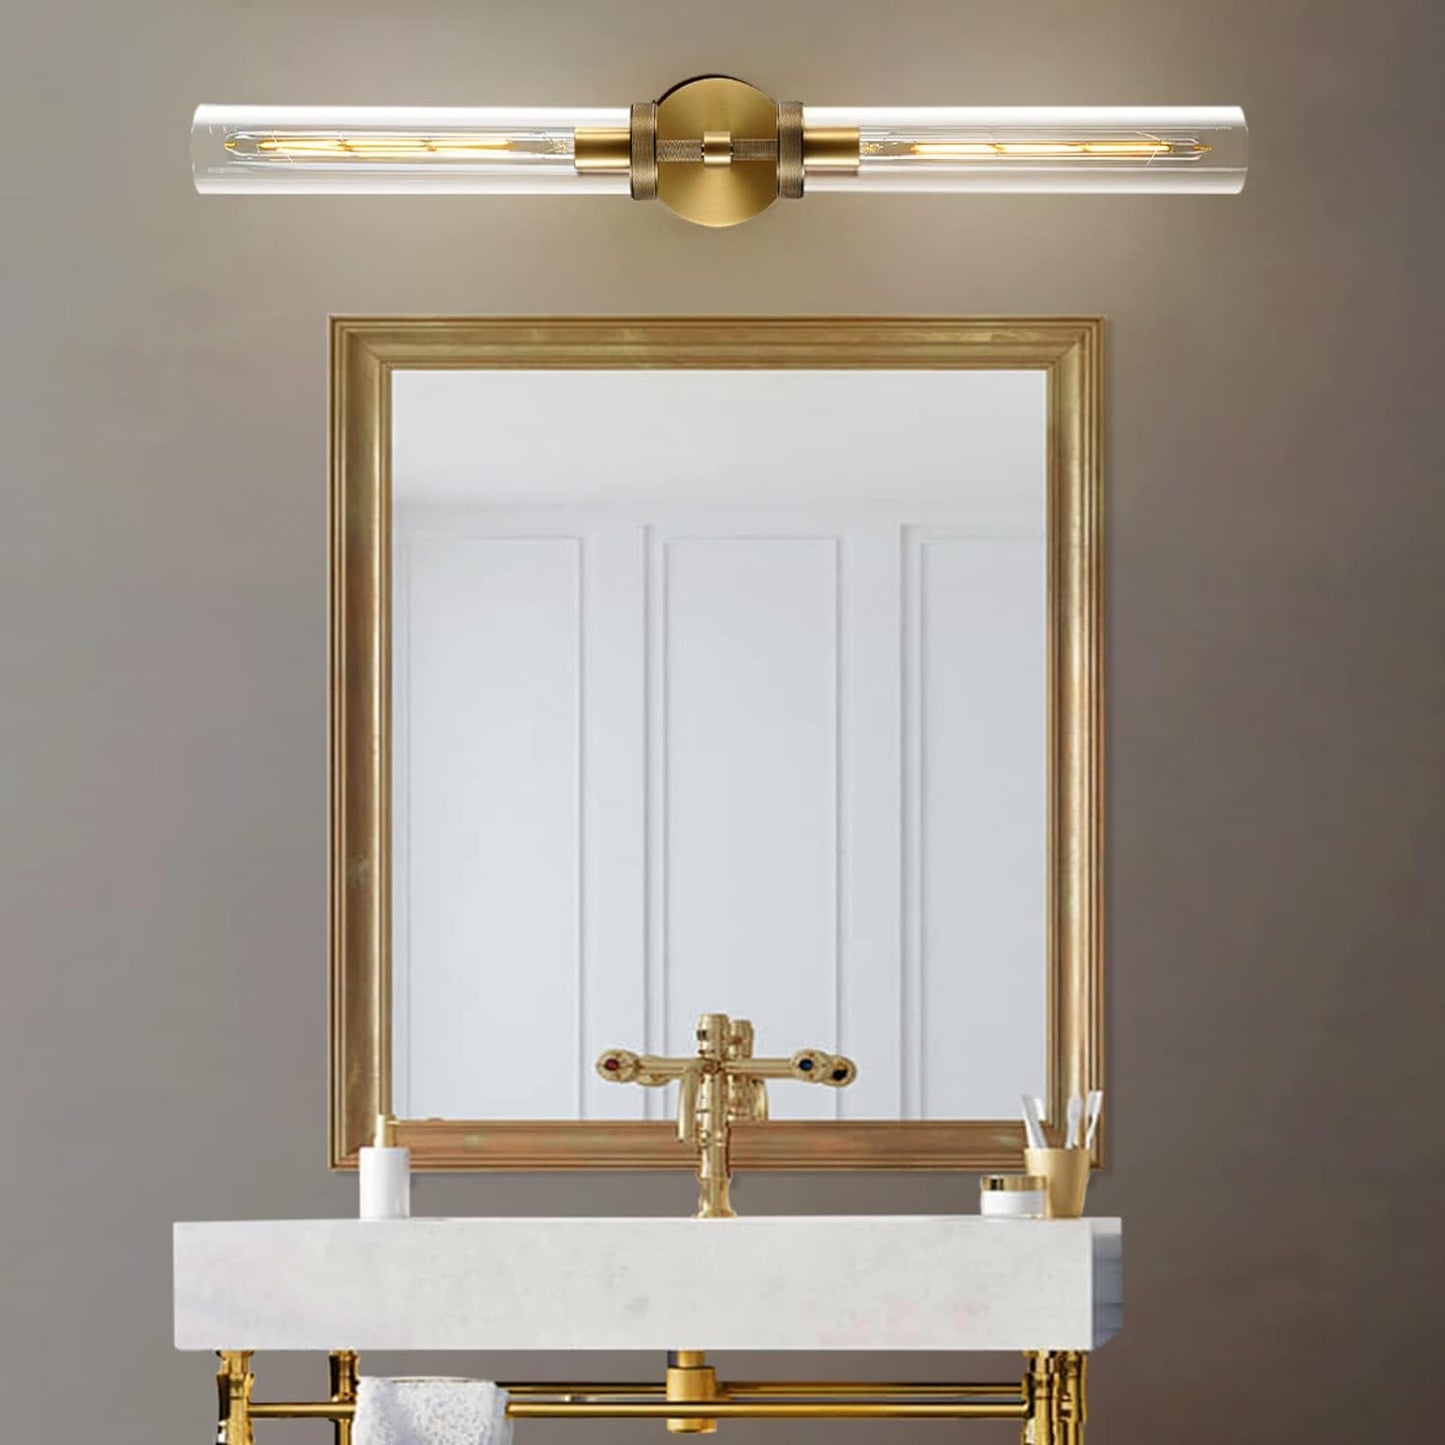 Double Lights Brass Wall Sconces, 30' Knurled Grand Linear Sconce Staircase Gold Sconces Wall Lighting Glass Bathroom Wall Sconces, Vanity Lighting Sconce Light Wall Lights for Living Room, Bedroom (30'